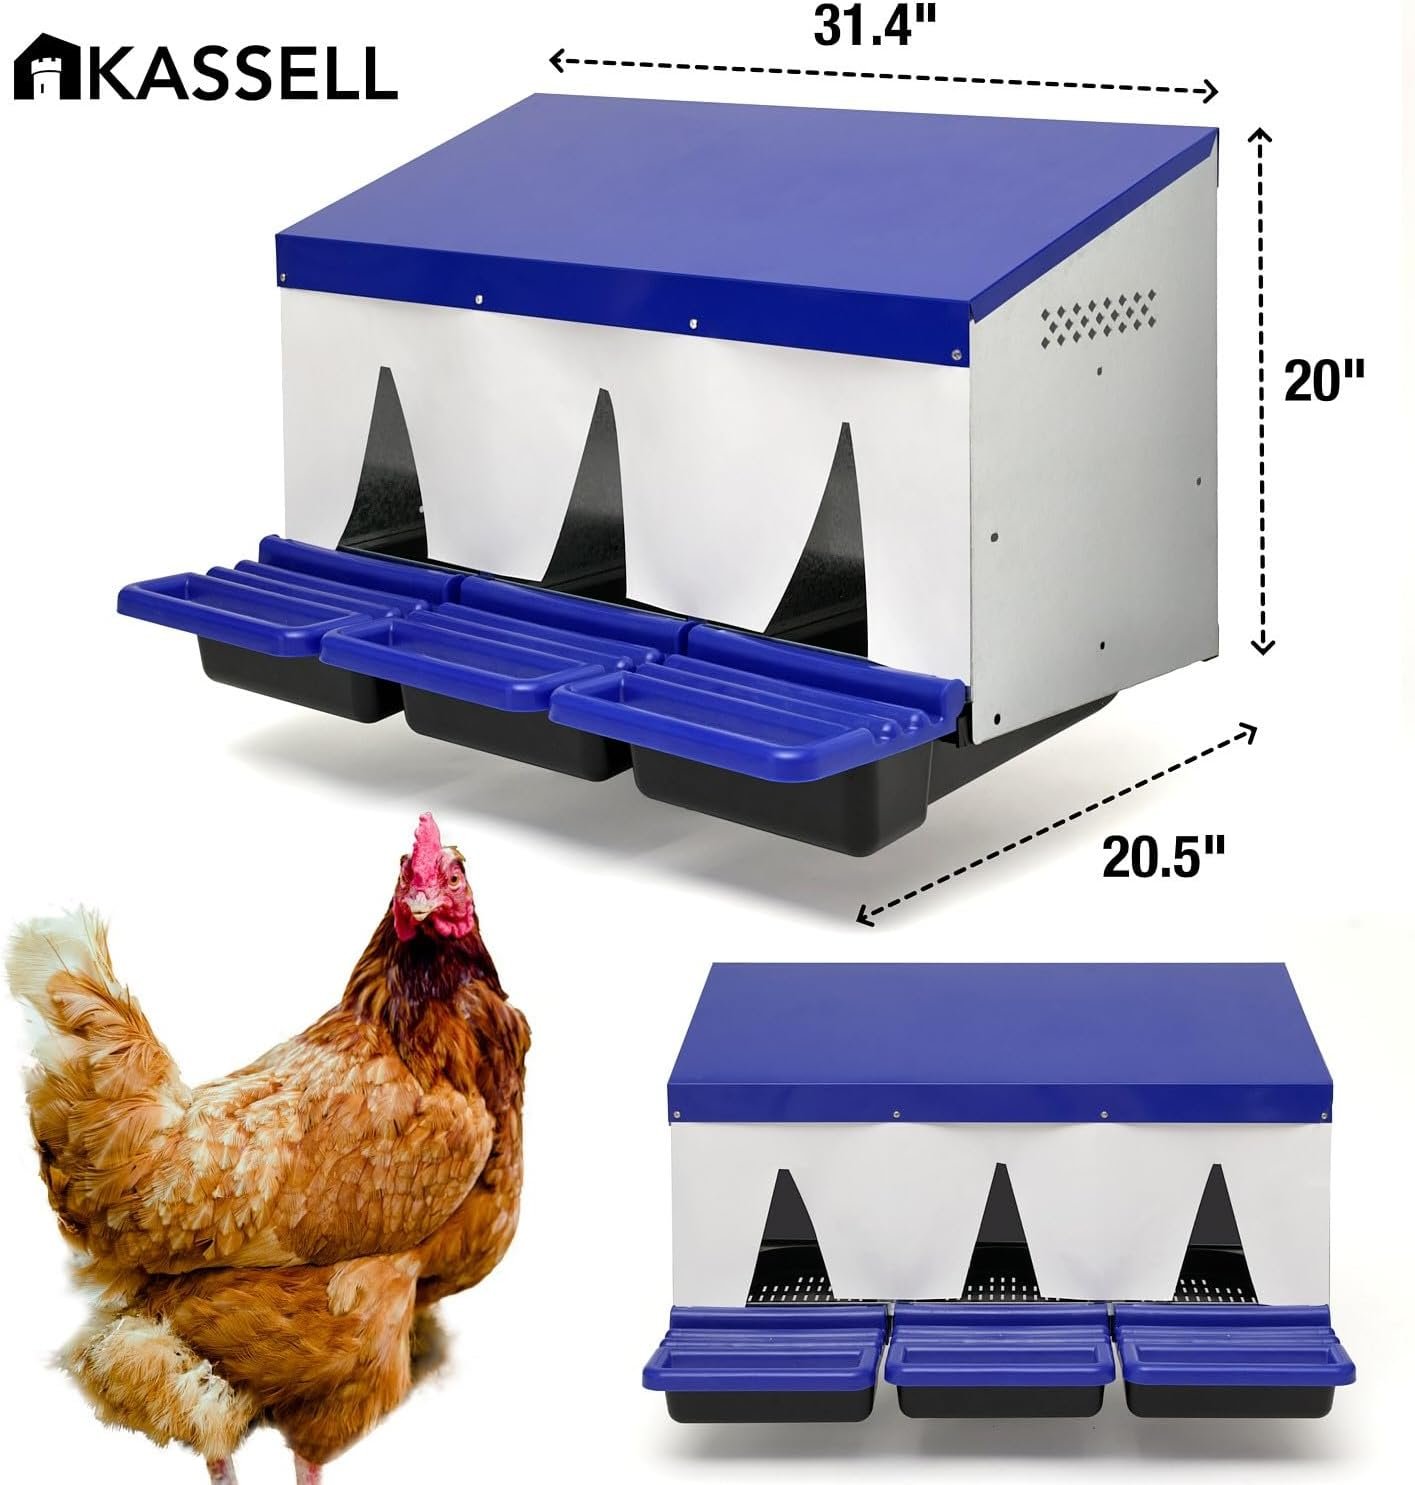 Three Hole Chicken Nesting Box with Perch and Curtains. Rollaway Chicken Boxes for Laying Eggs. Nesting Box- Blue